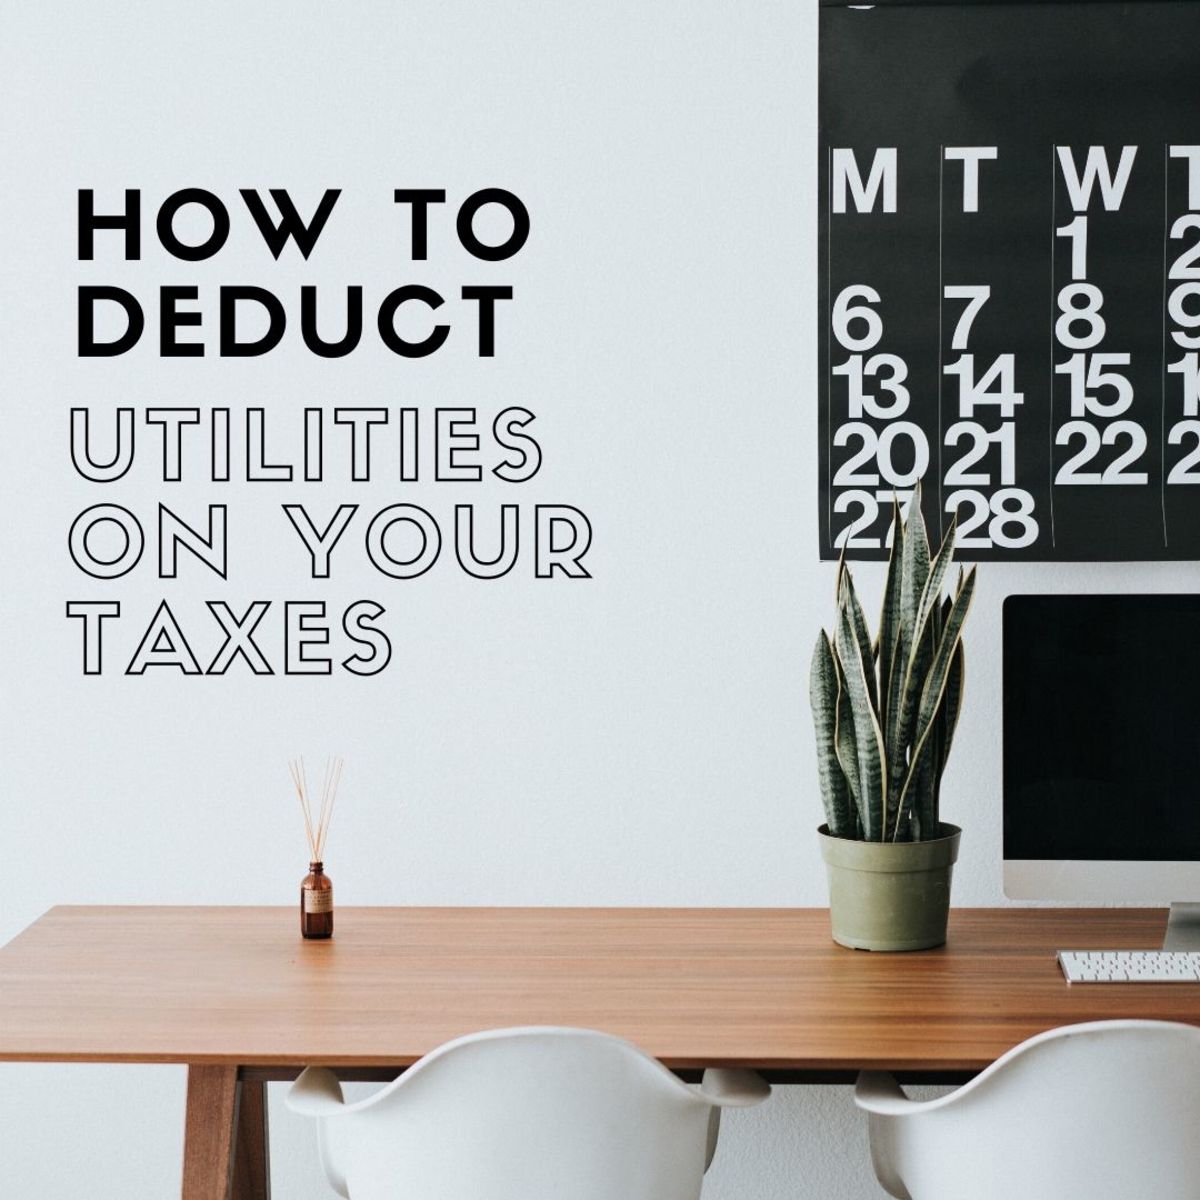 Utilities as Business Deductions for Income Tax Purposes